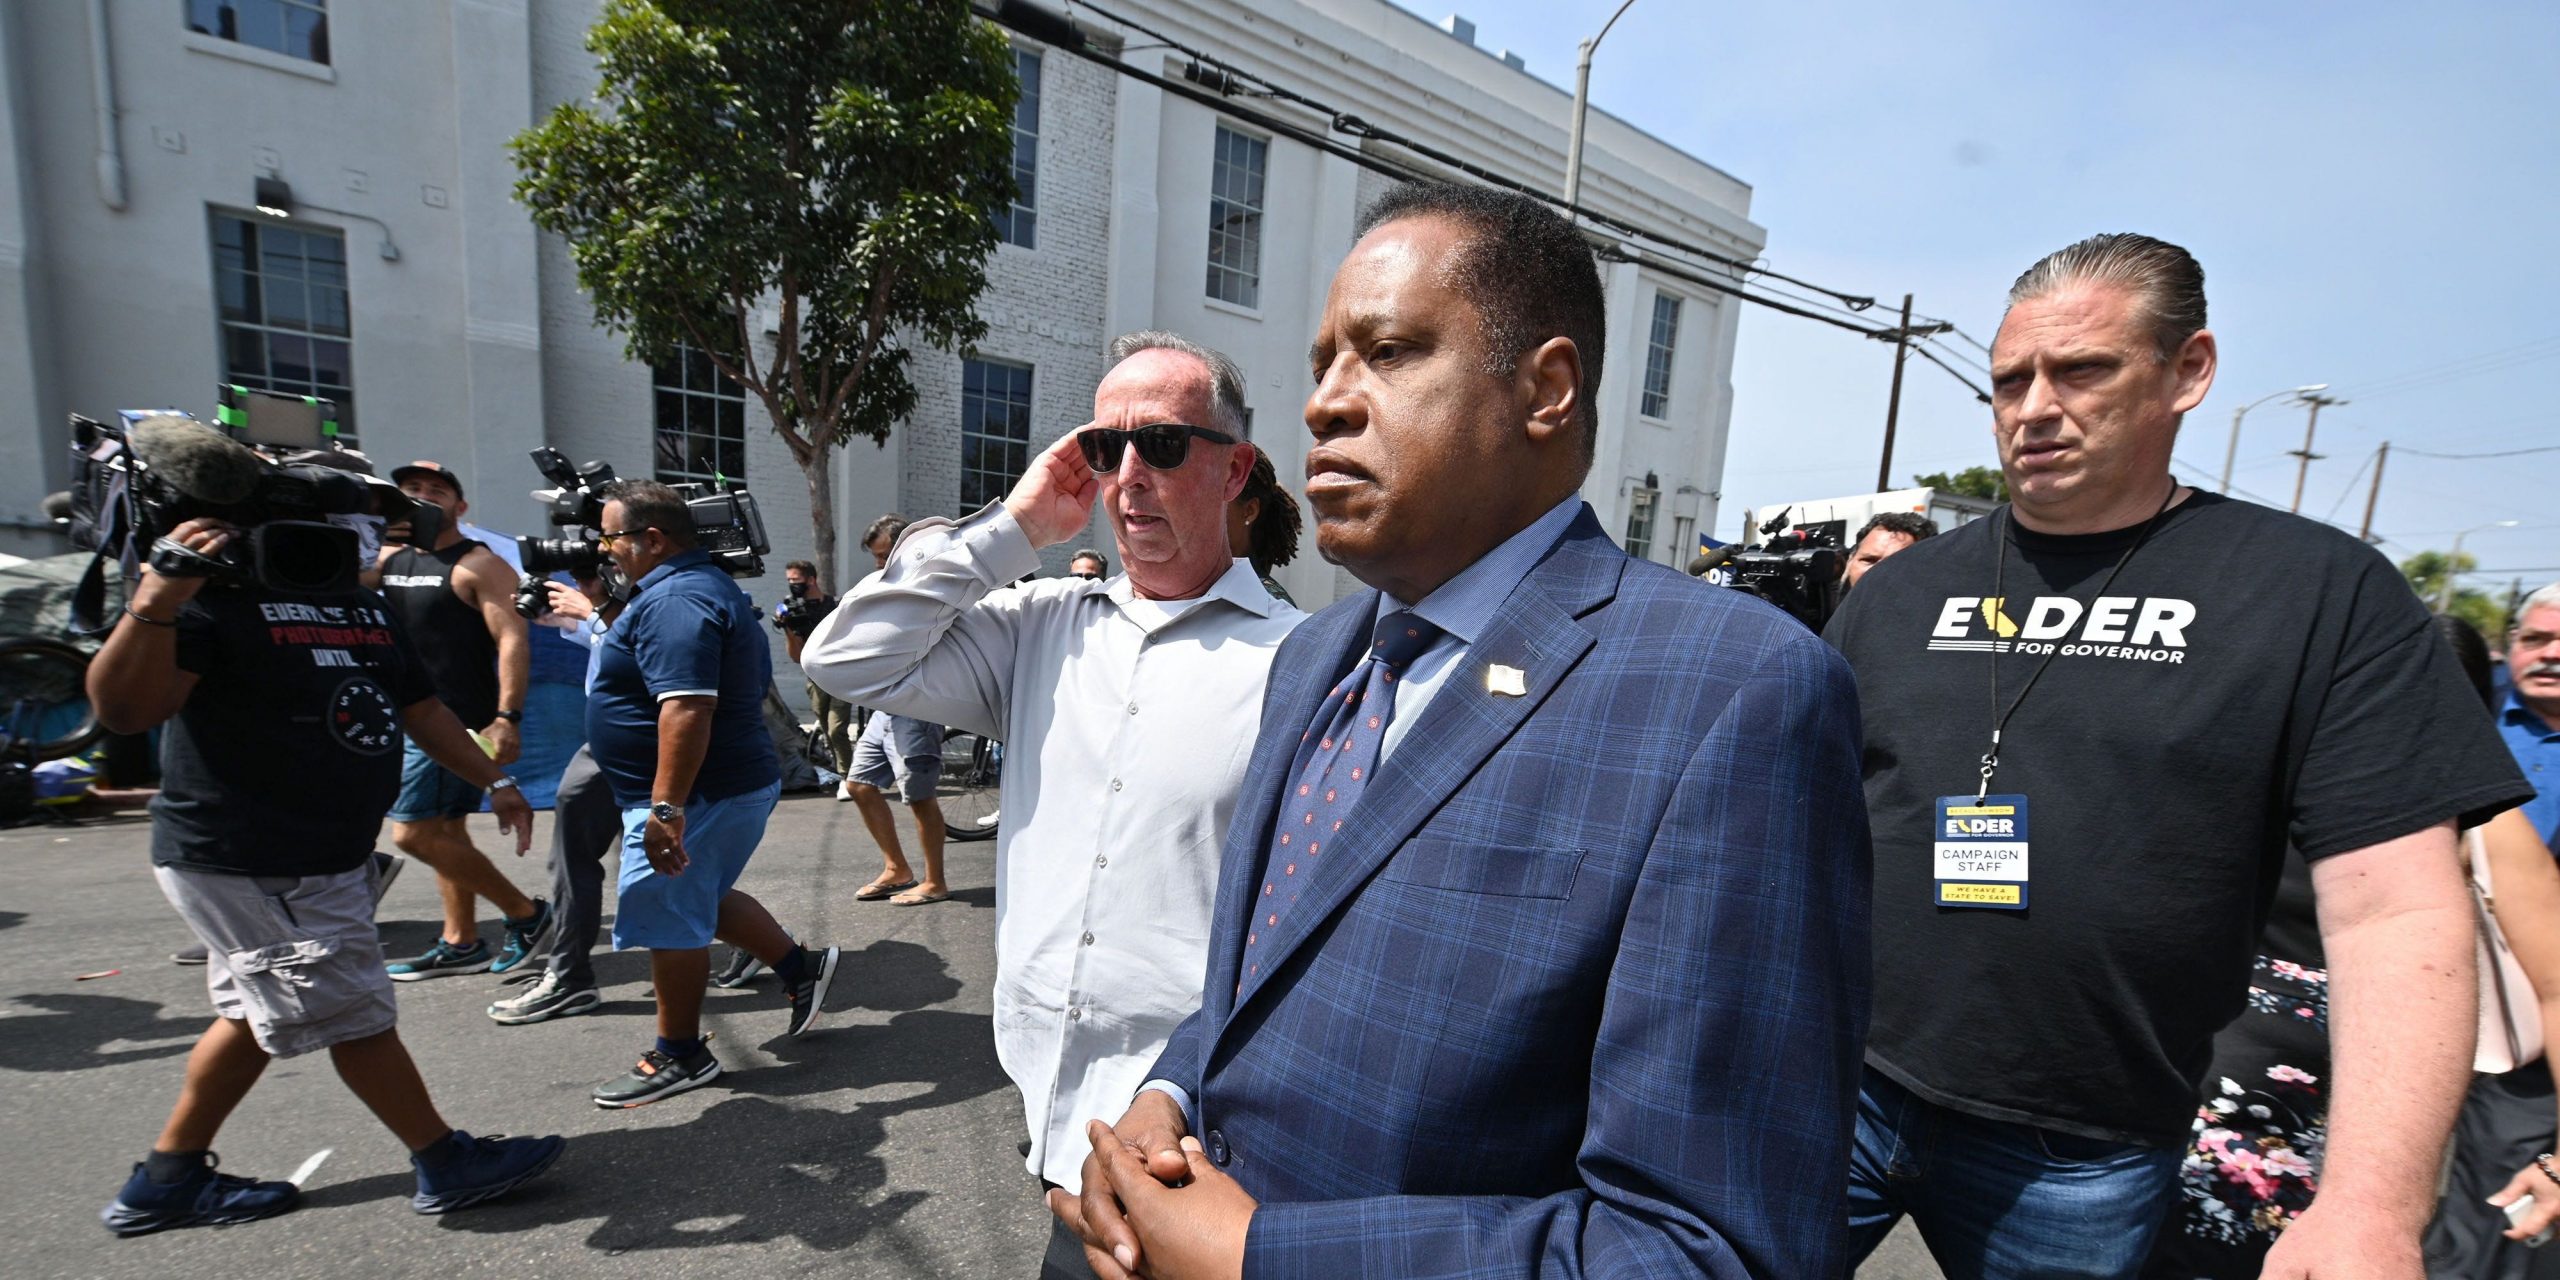 Conservative talk show host and gubernatorial recall candidate Larry Elder (C) walks along streets lined with tents of unhoused people, in the Venice neighborhood of Los Angeles, California, September 8, 2021 ahead of the special recall election. - The recall election, which will be held on September 14, 2021, asks voters to respond two questions: whether Governor Gavin Newsom, a Democratic, should be recalled from the office of governor, and who should succeed Newsom if he is recalled. Forty-six candidates, including nine Democrats and 24 Republicans, are looking to take Newsom's place as the governmental leader of California.